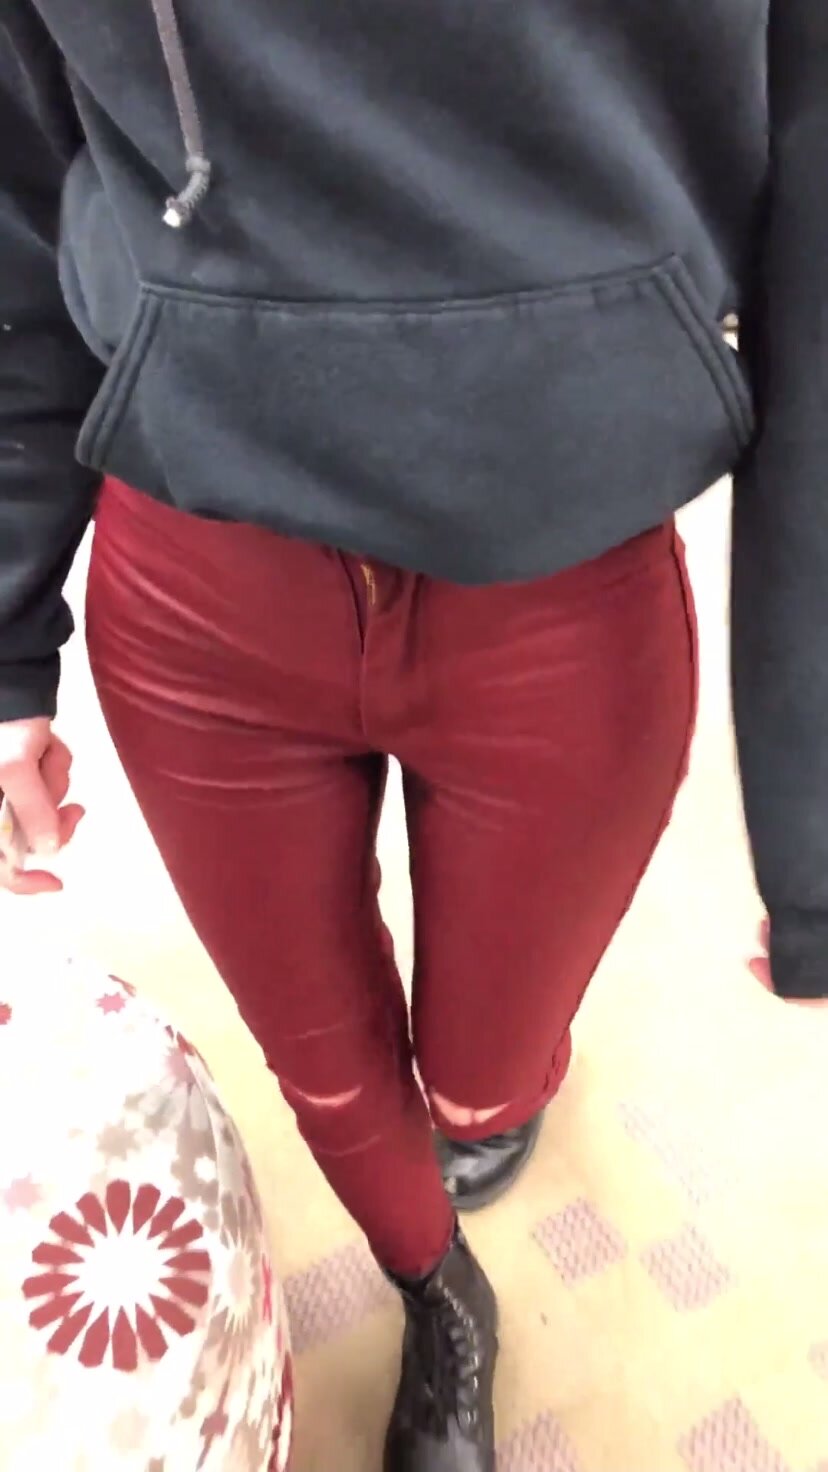 Girl pees her red pants